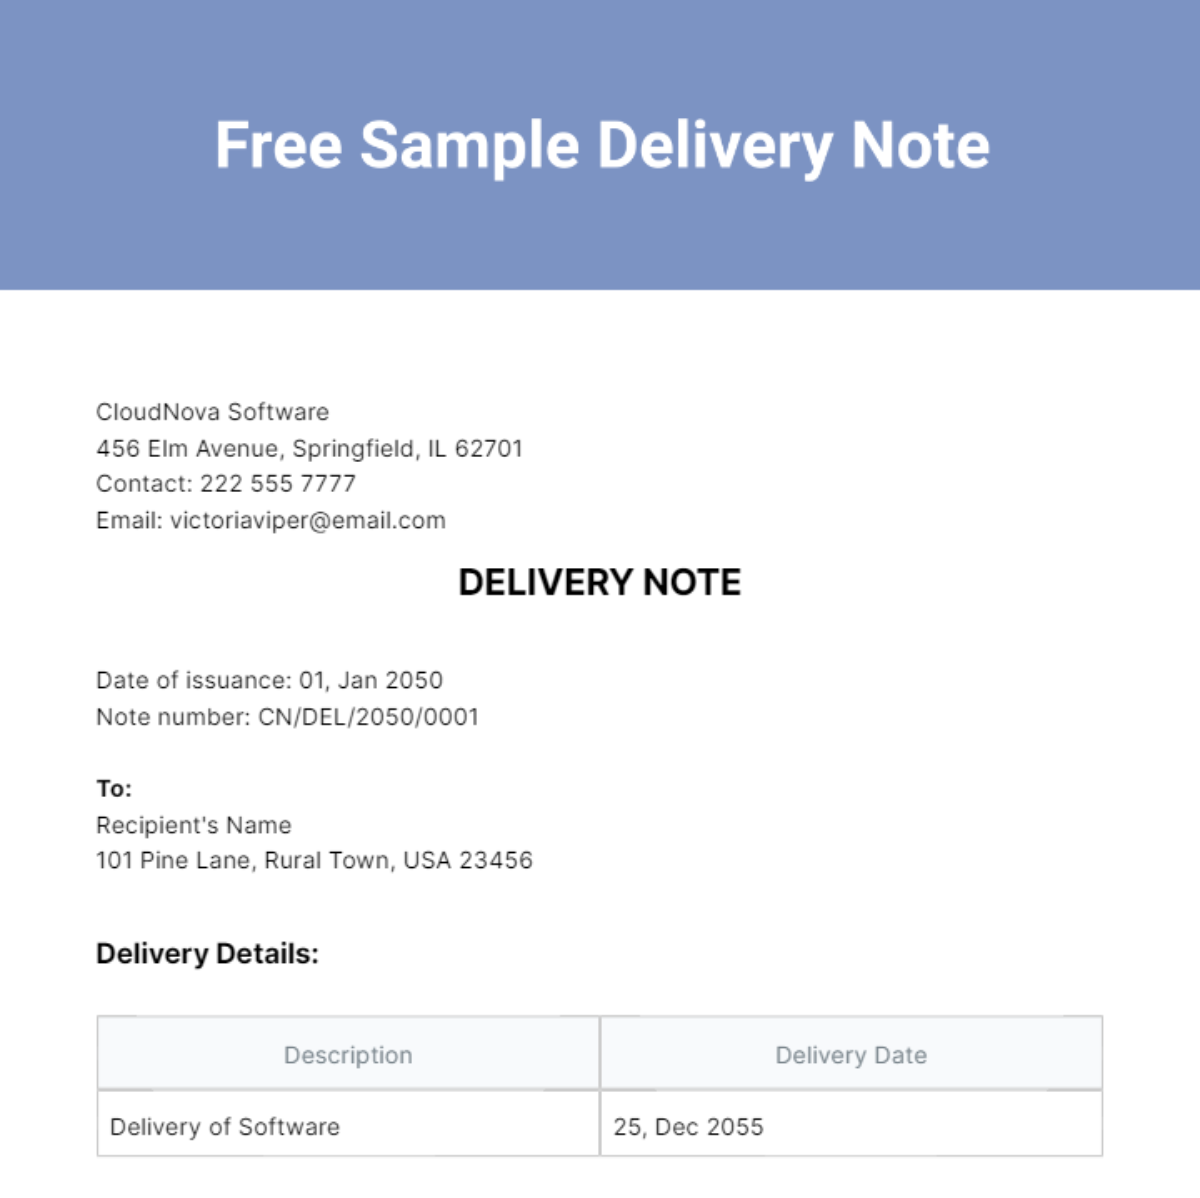 Free Sample Delivery Note Template